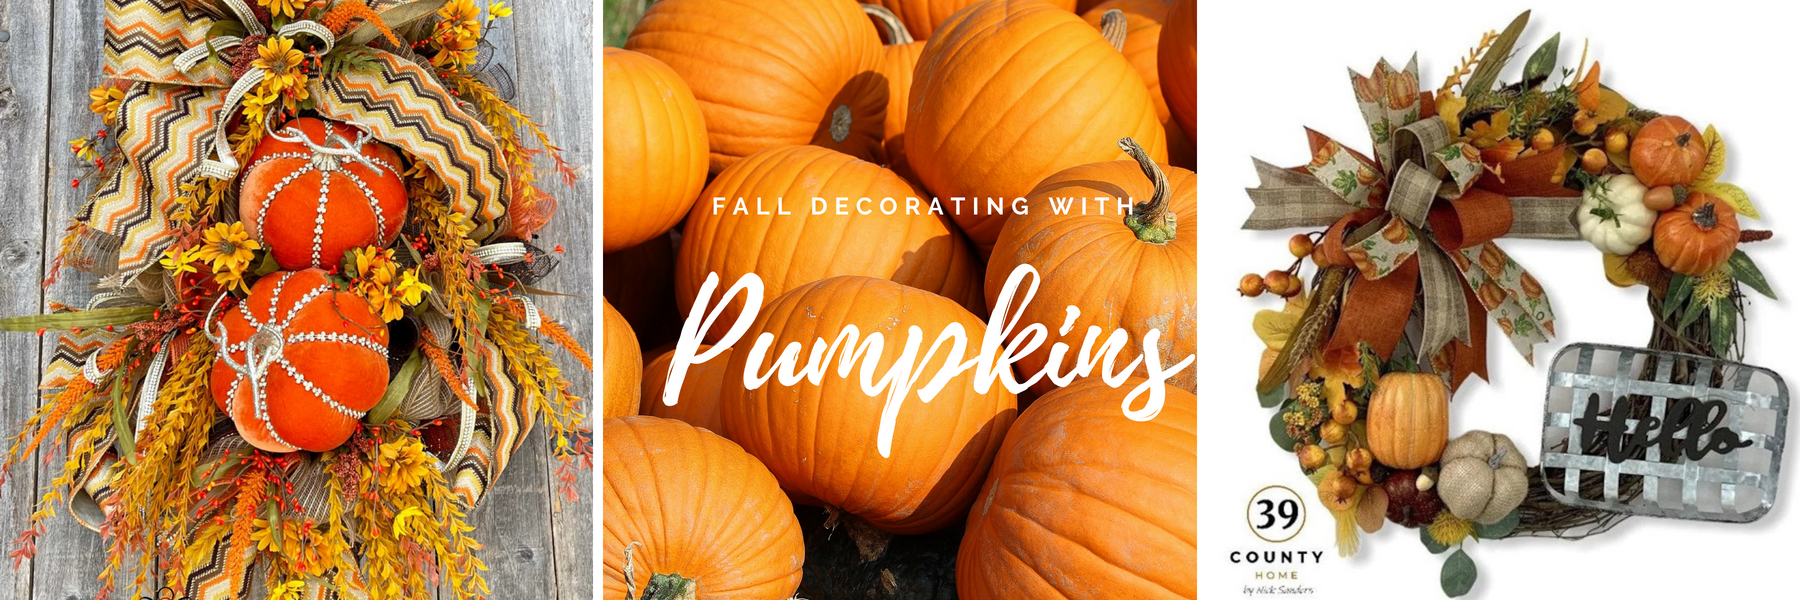 Fall Decorating with Pumpkins!